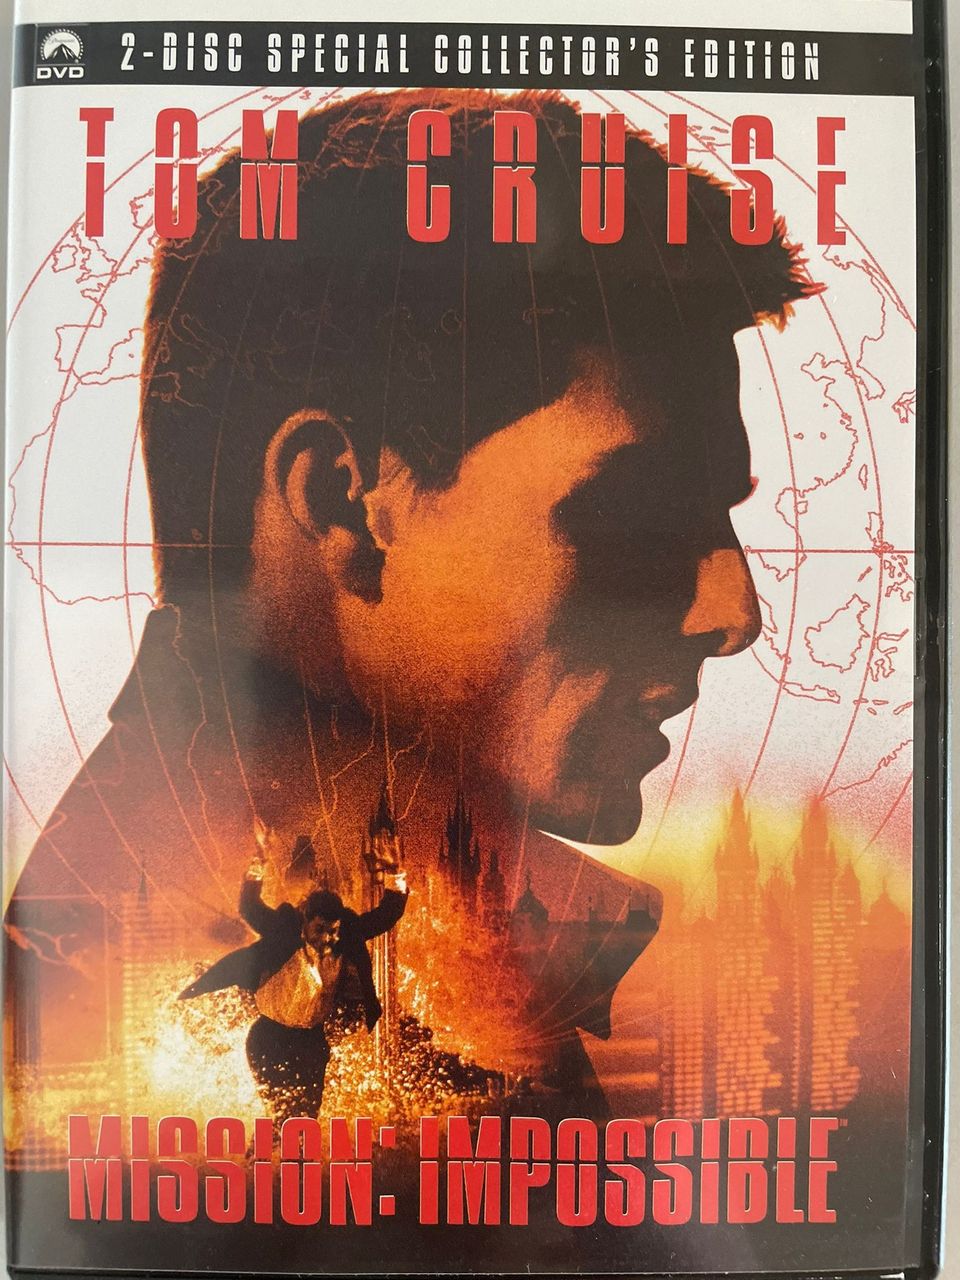 Mission: Imbossible DVD 2-Disc Special Collector's Edition